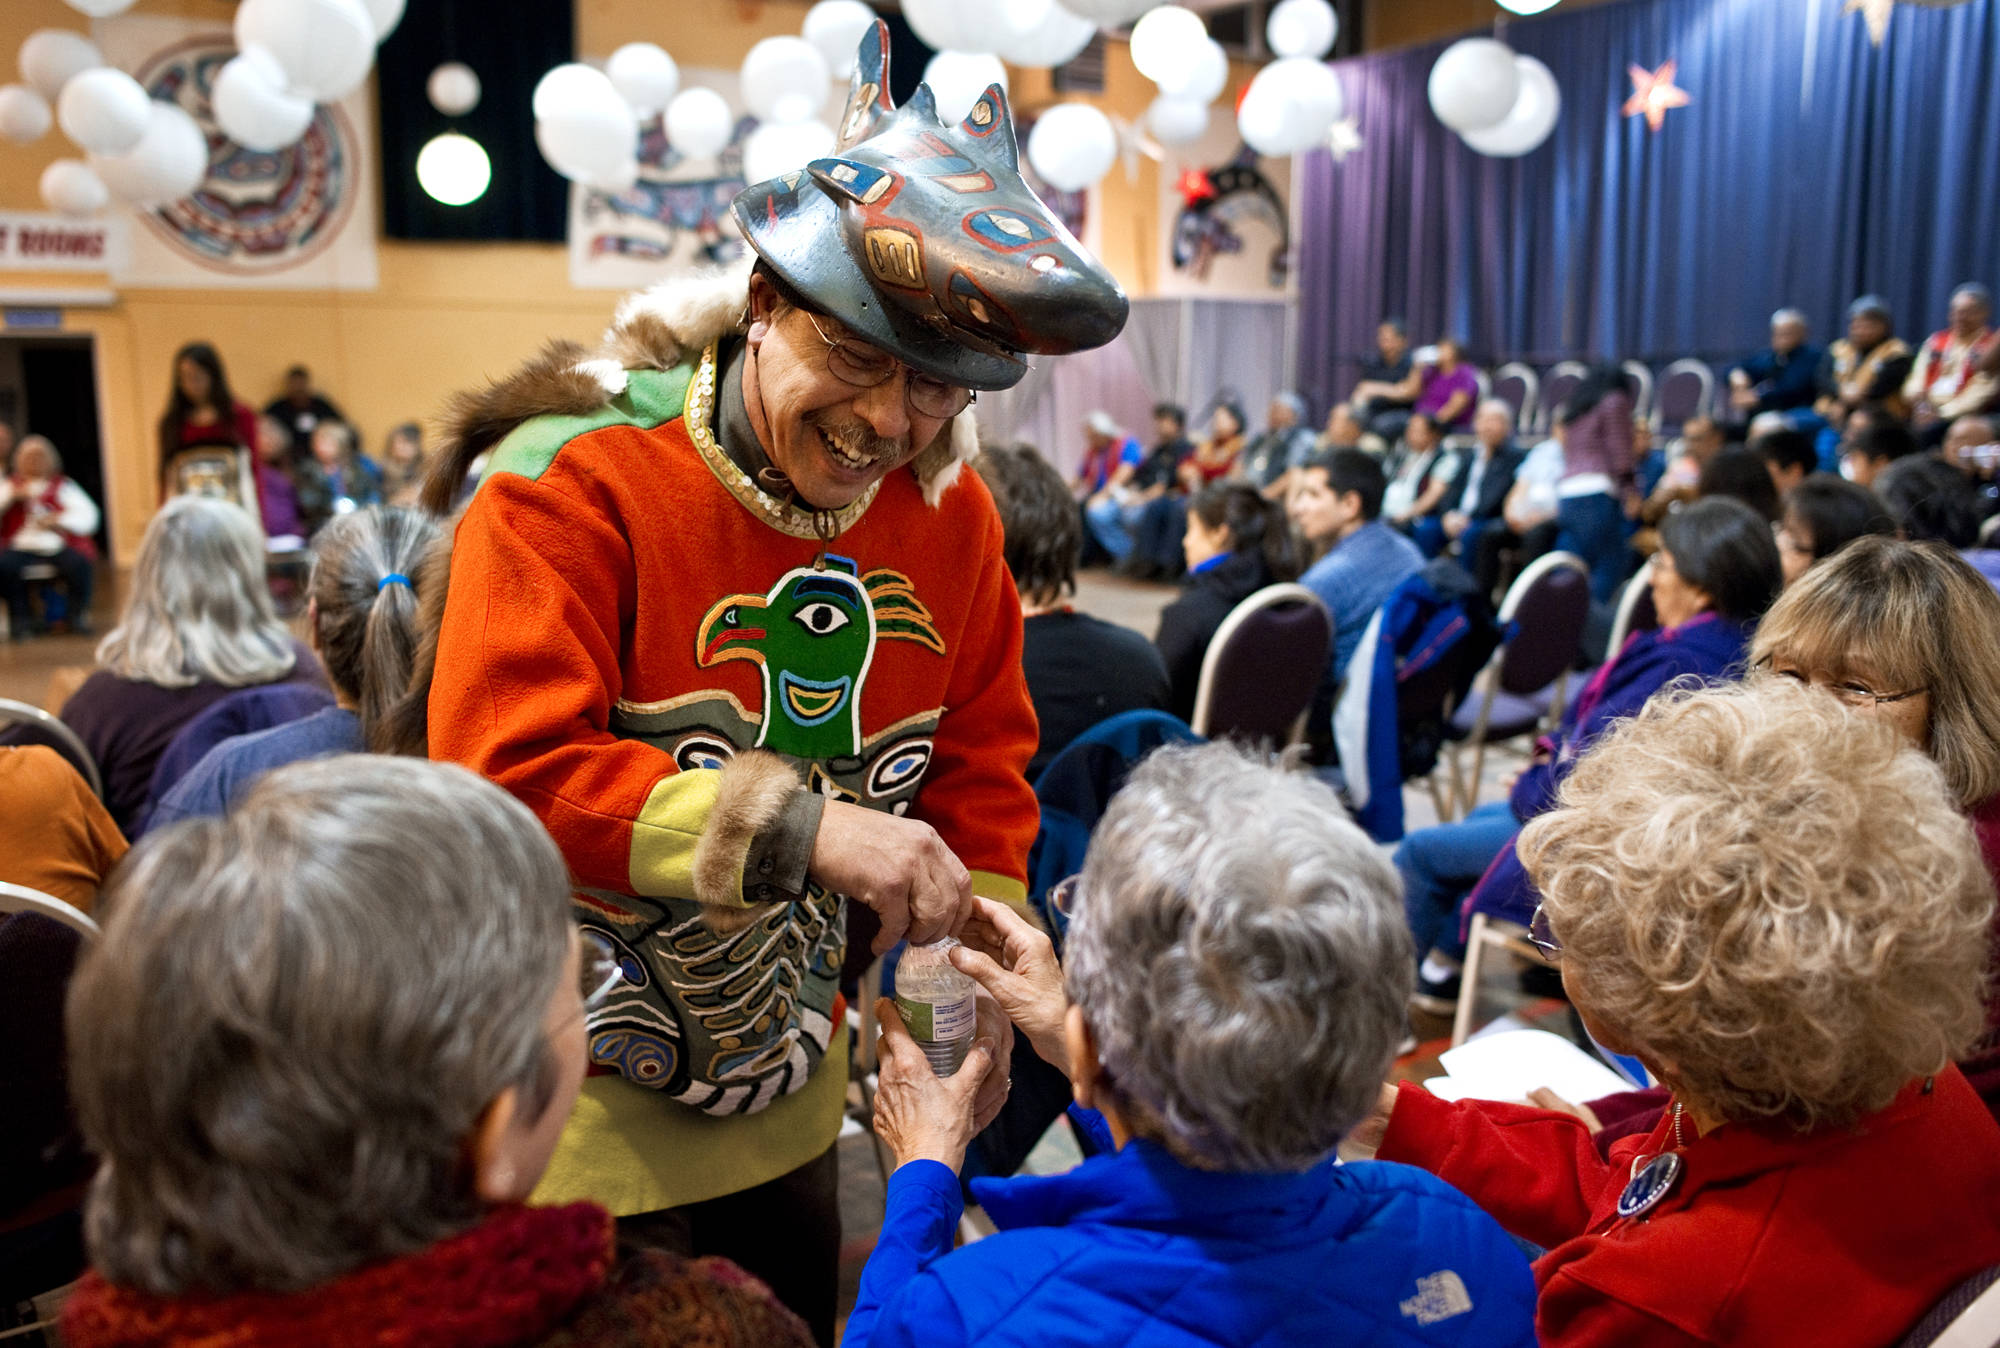 Michael Tagaban, of the Wooshkeetaan Clan, brings water to elders during a “Warming of the Hands” ceremony at the Juneau Arts & Culture Center in November 2013. The ceremony opened a four-day Sharing Our Knowledge conference at Centennial Hall focusing on culture and Tlingit language. The conference starts Thursday and runs through Sunday this year. (Michael Penn | Juneau Empire File)